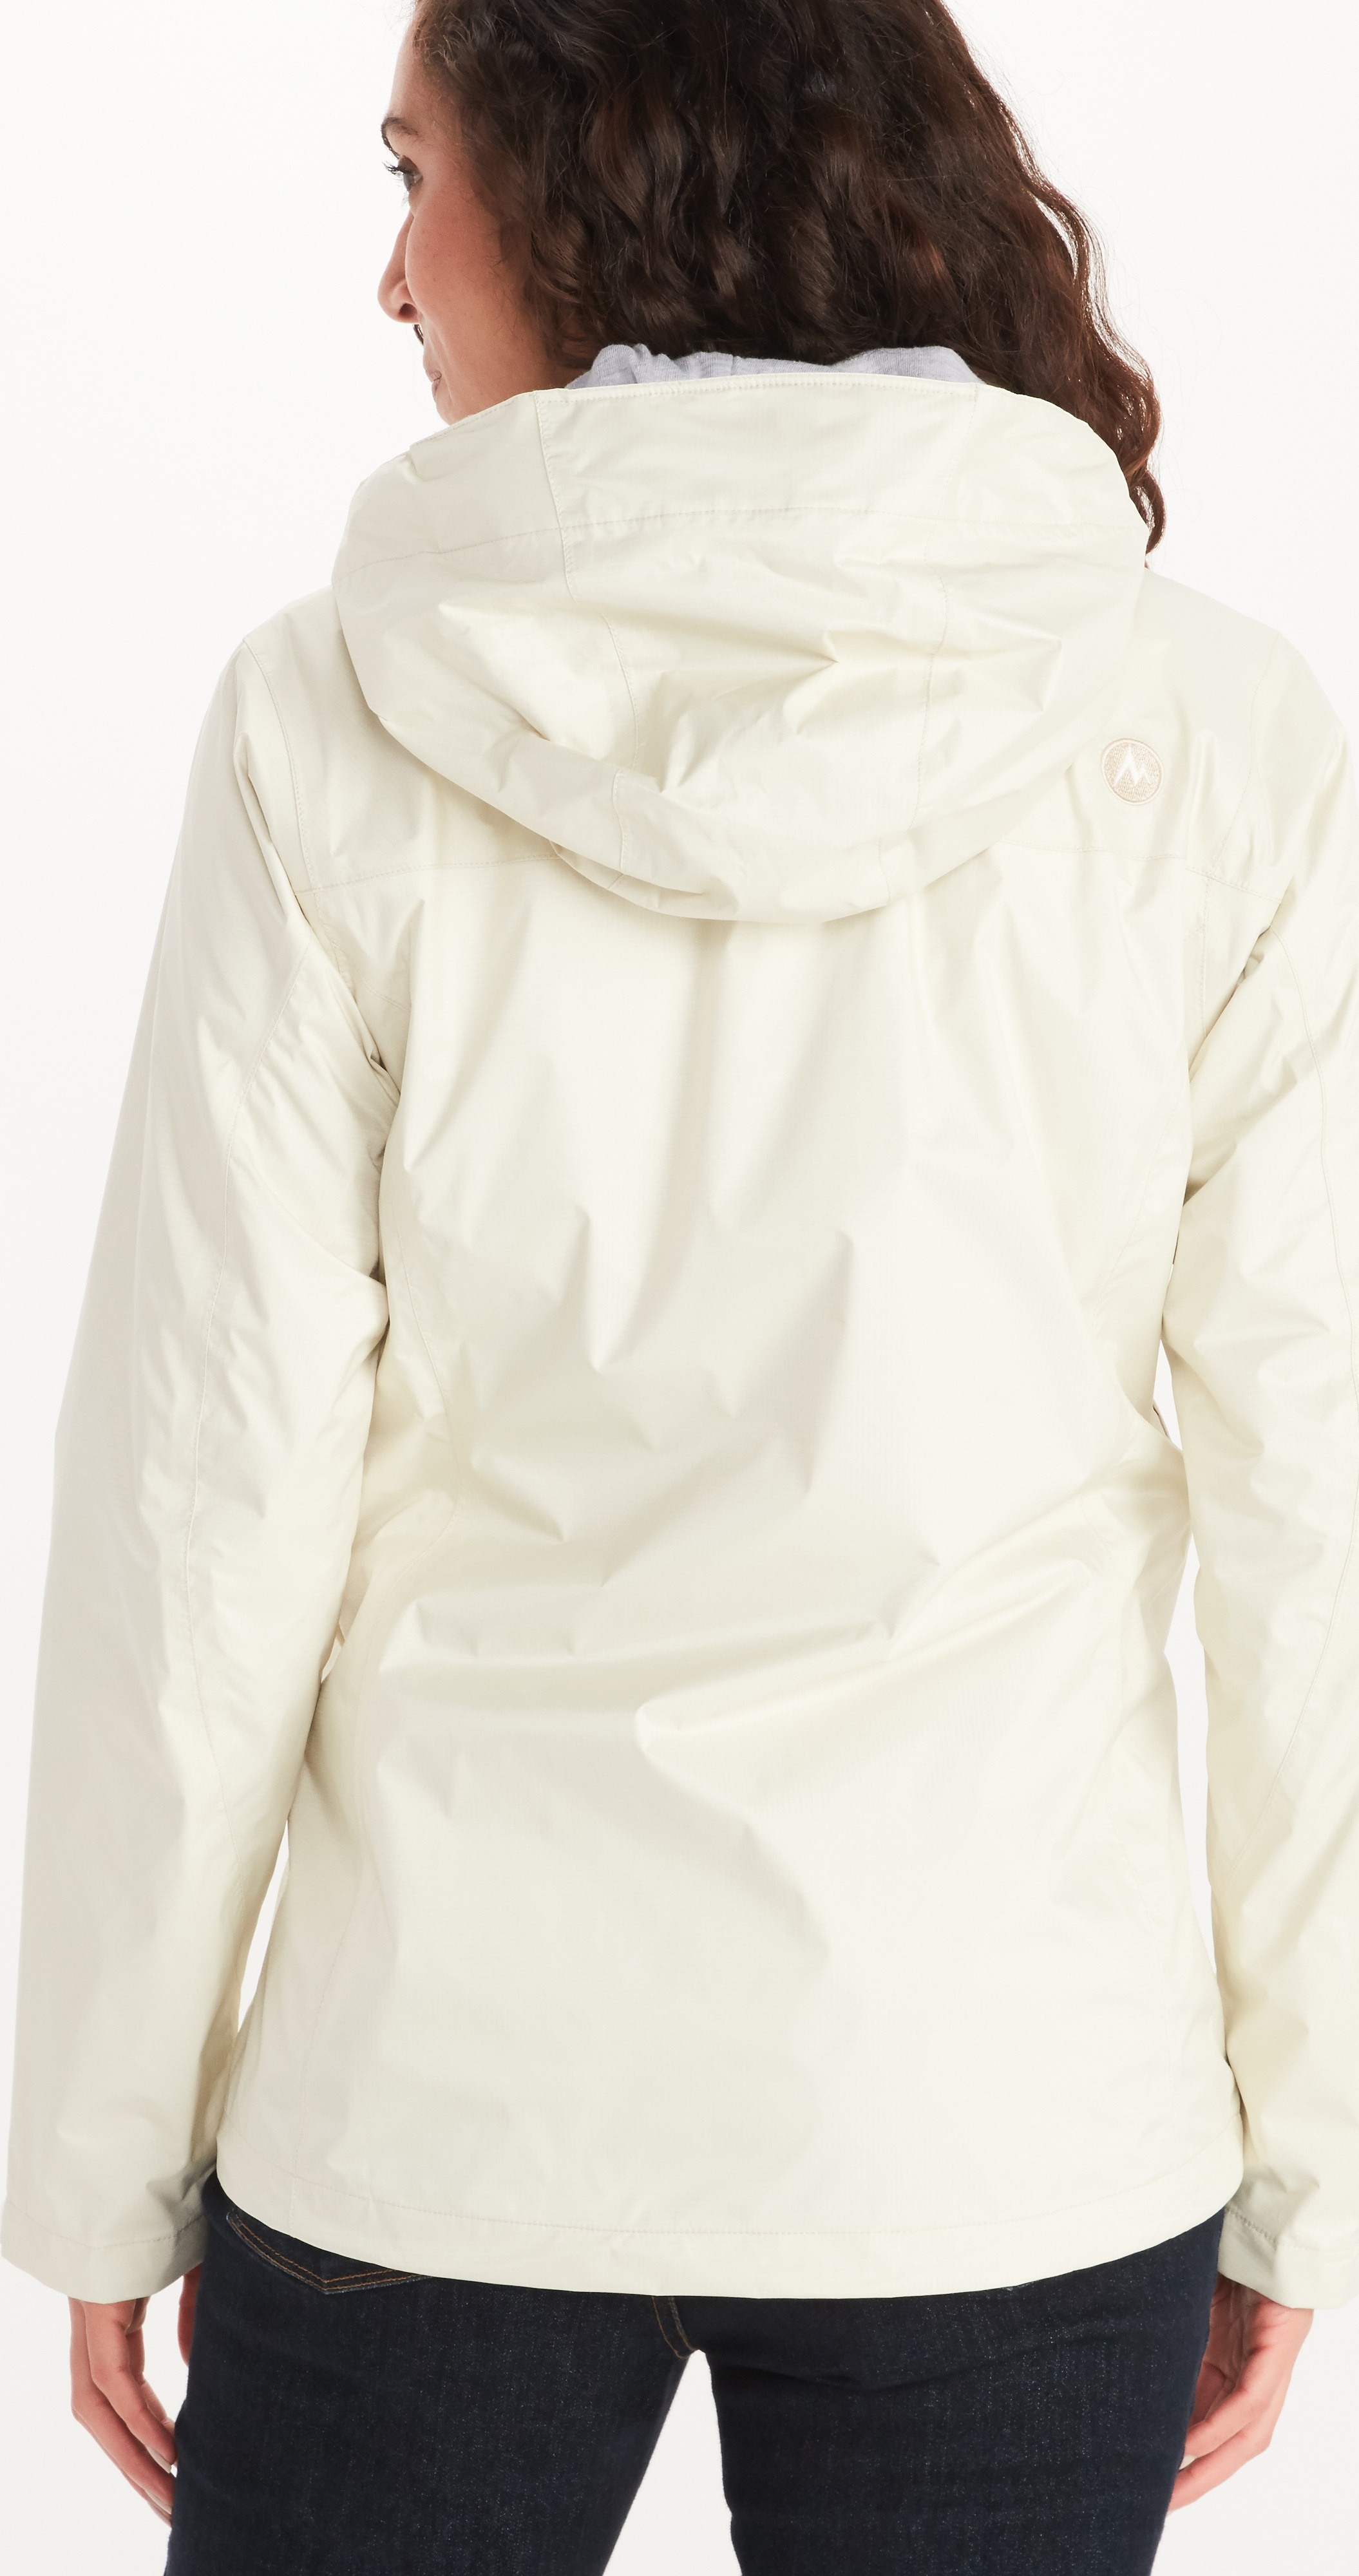 Buy Women's PreCip Eco Jacket Papyrus here | Outnorth